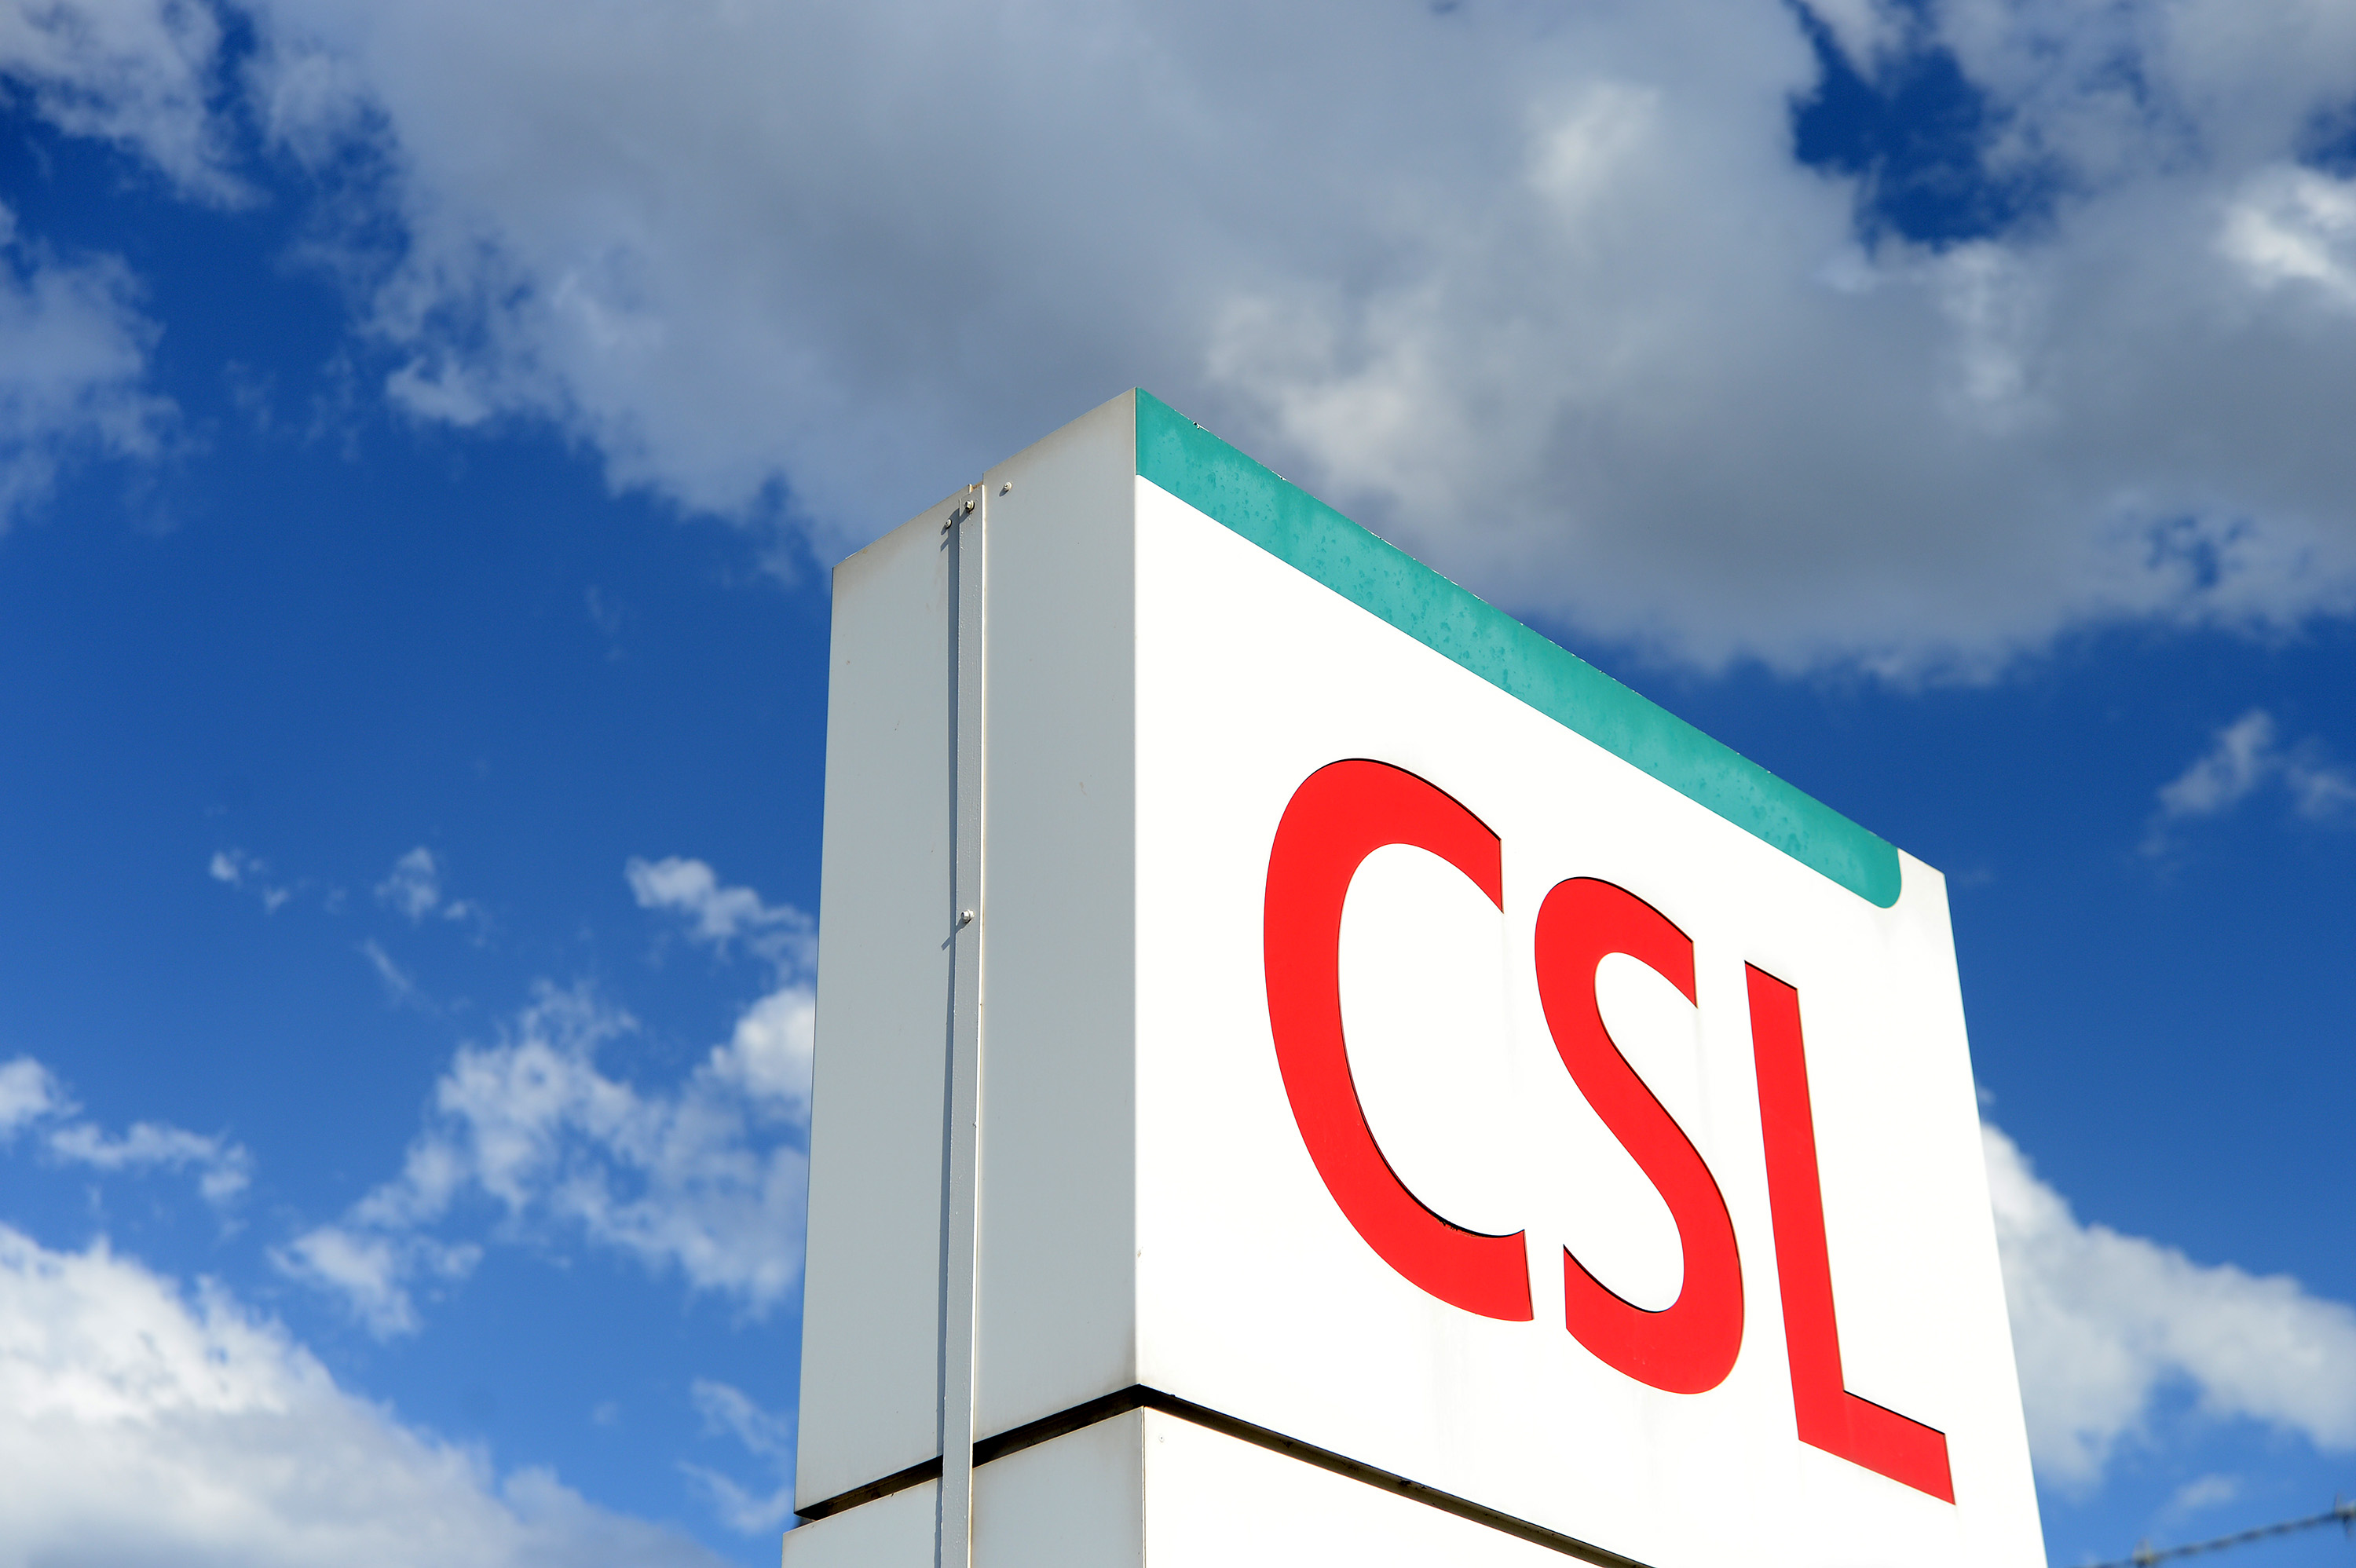 The CSL Ltd. logo on the CSL Behring plasma processing facility in Melbourne.